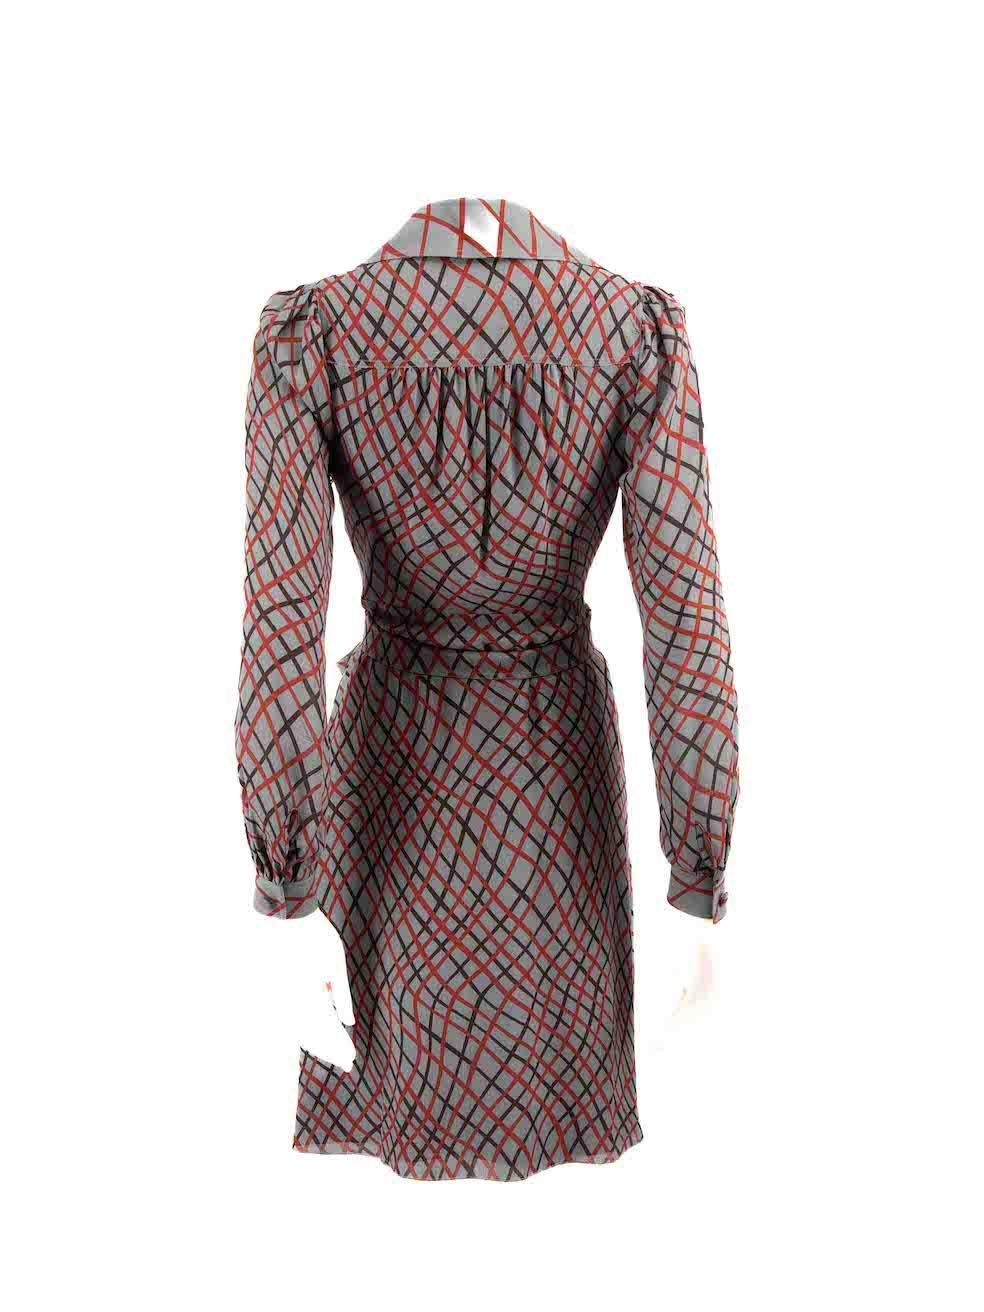 Gucci Checkered Belted Knee Length Dress Size XXS In Excellent Condition For Sale In London, GB